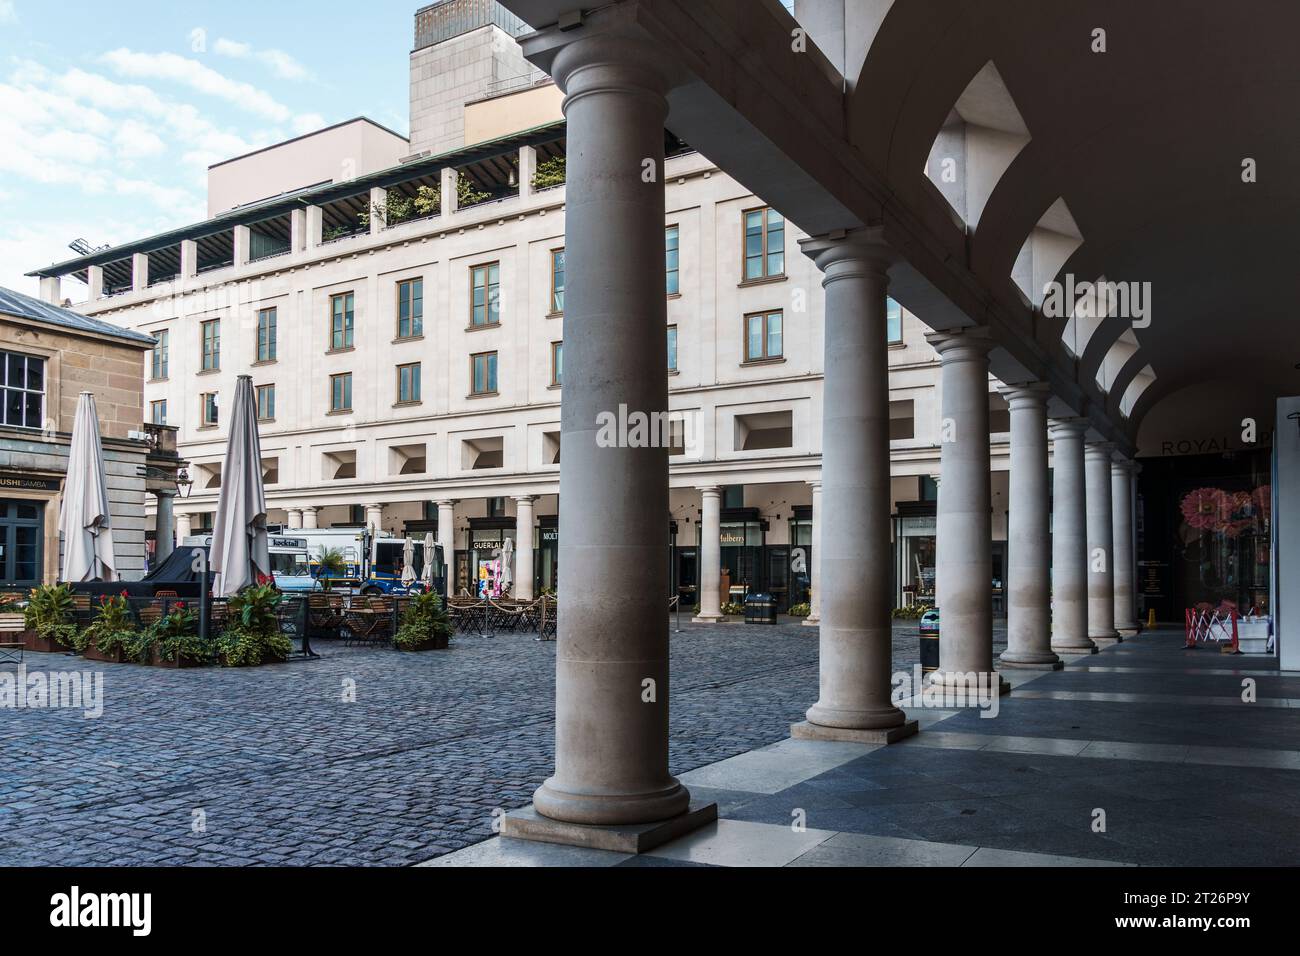 LONDON, UK - August 25, 2023: View of the arcade of Royal Opera House in Covent Garden area. Covent Garden is renowned for its luxury fashion and beau Stock Photo